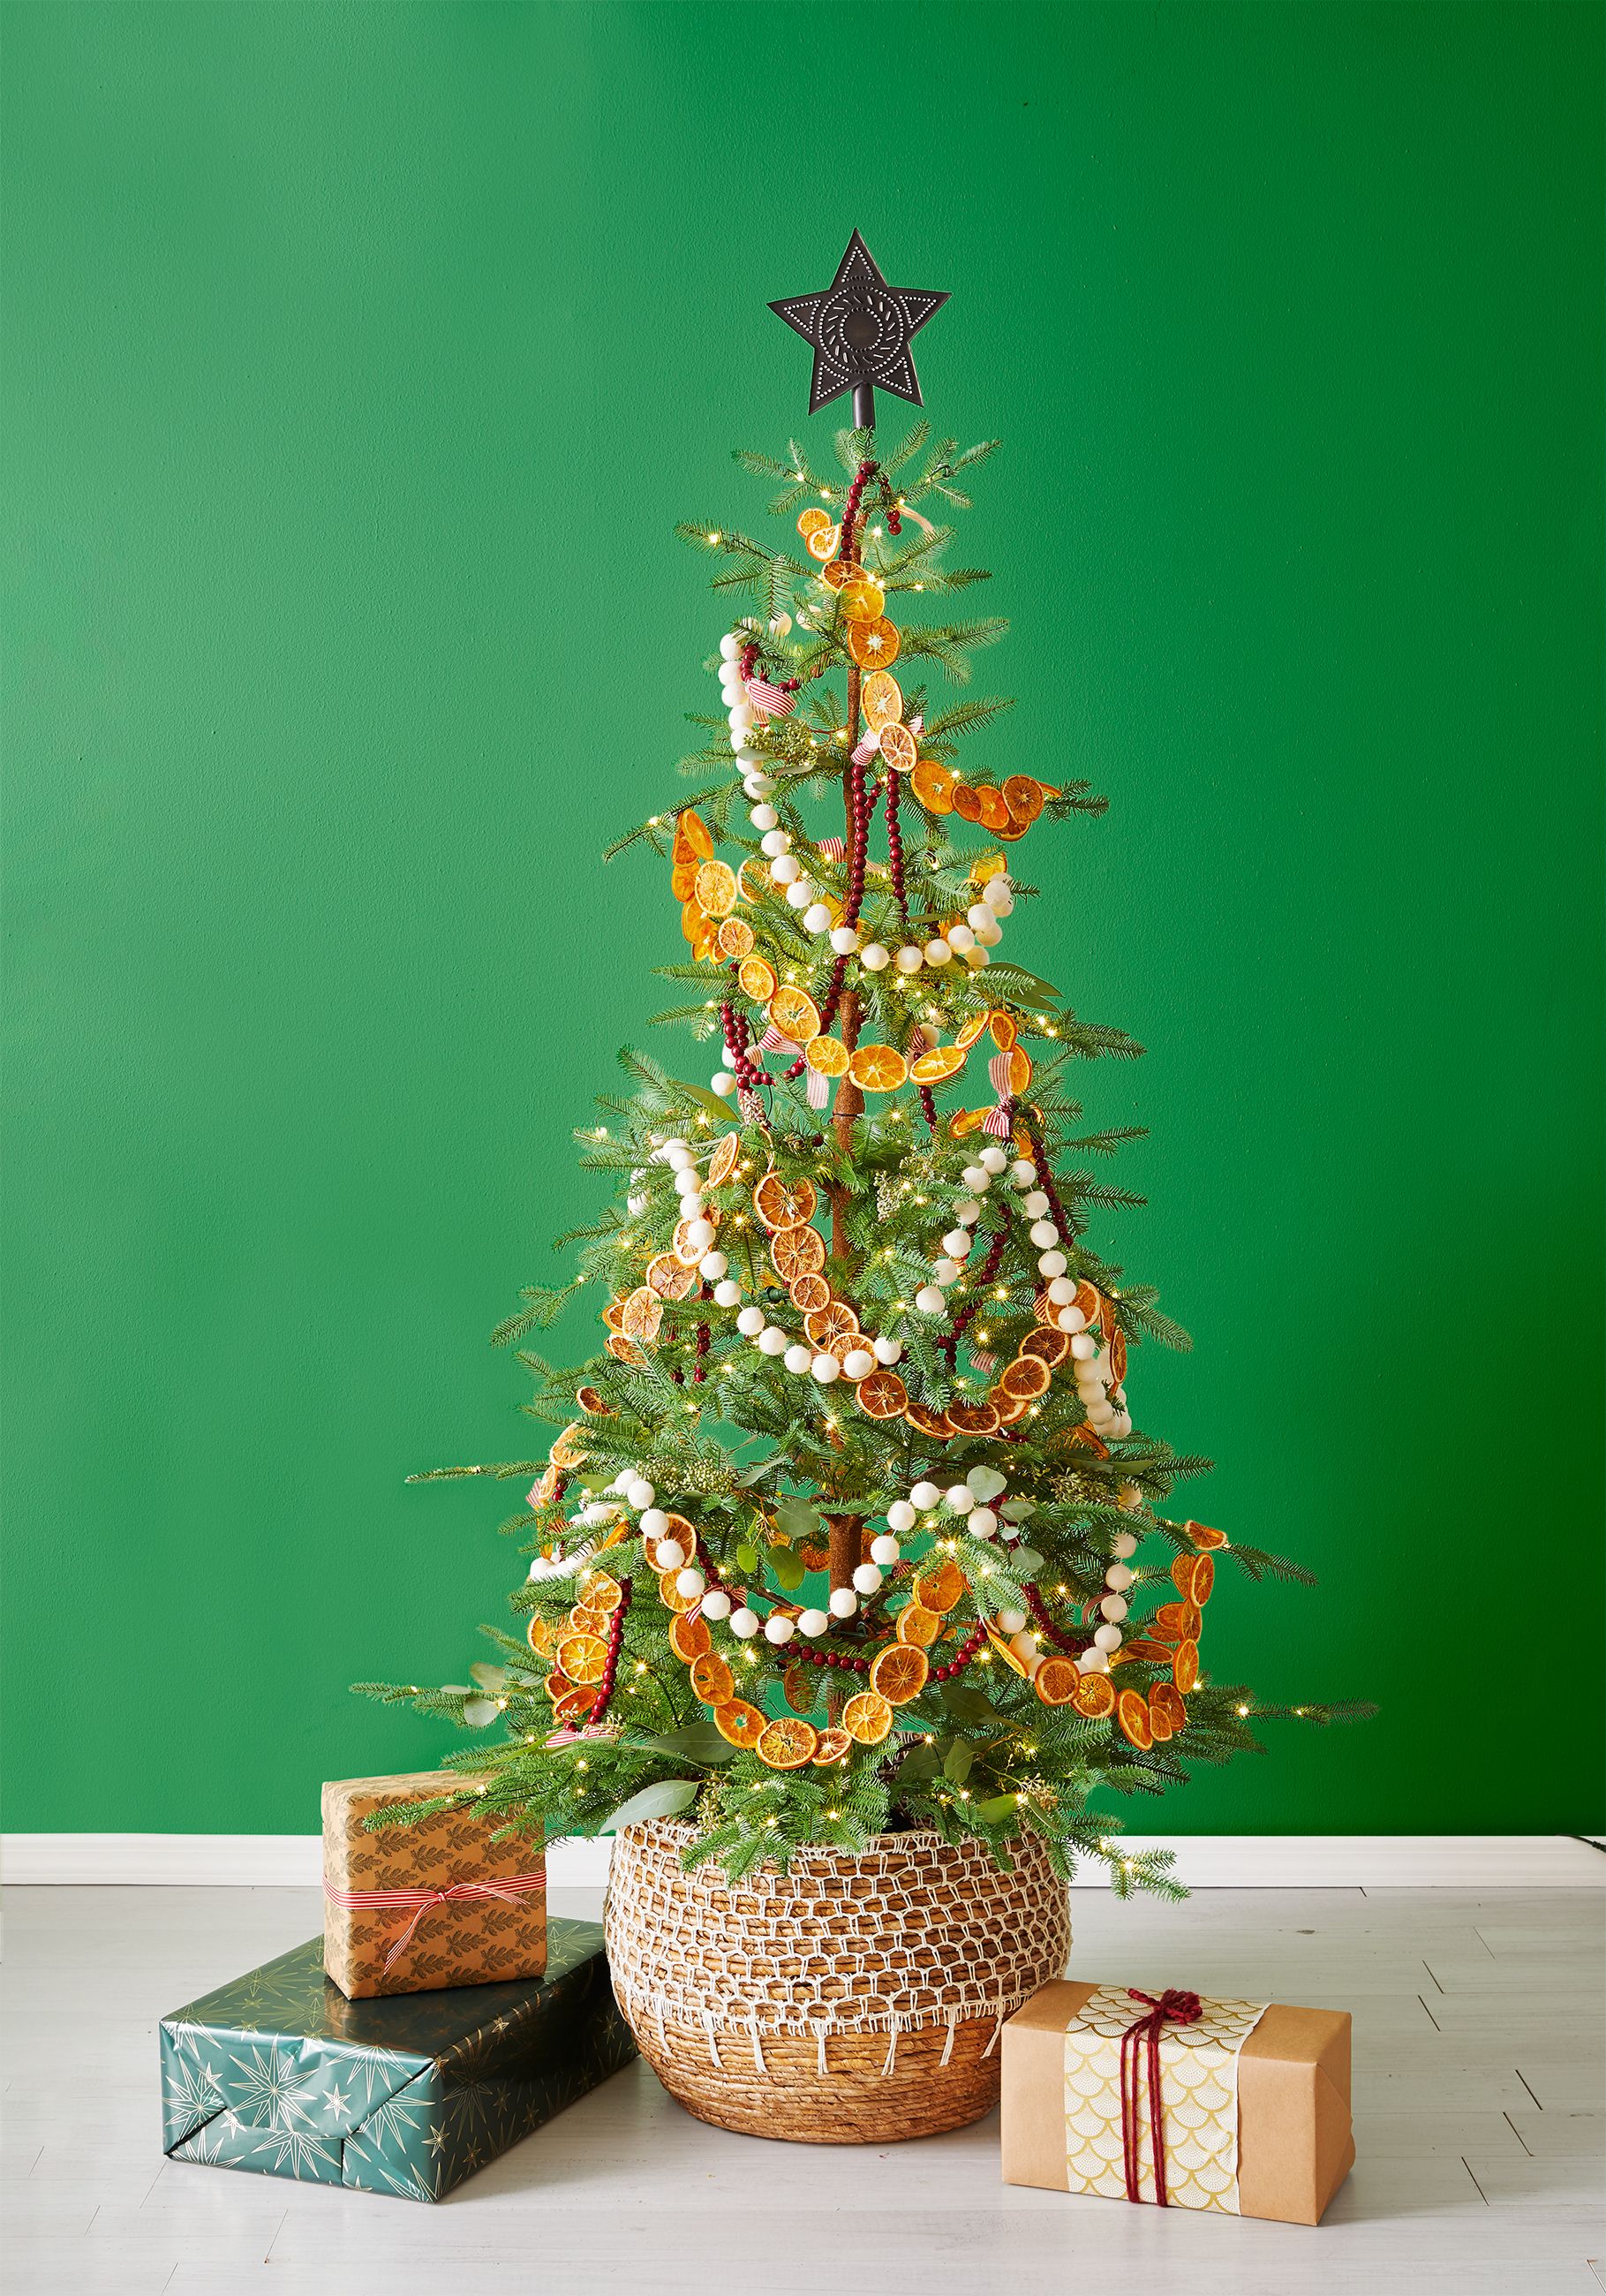 An Old-Fashioned Christmas: Rustic and Vintage Christmas Décor